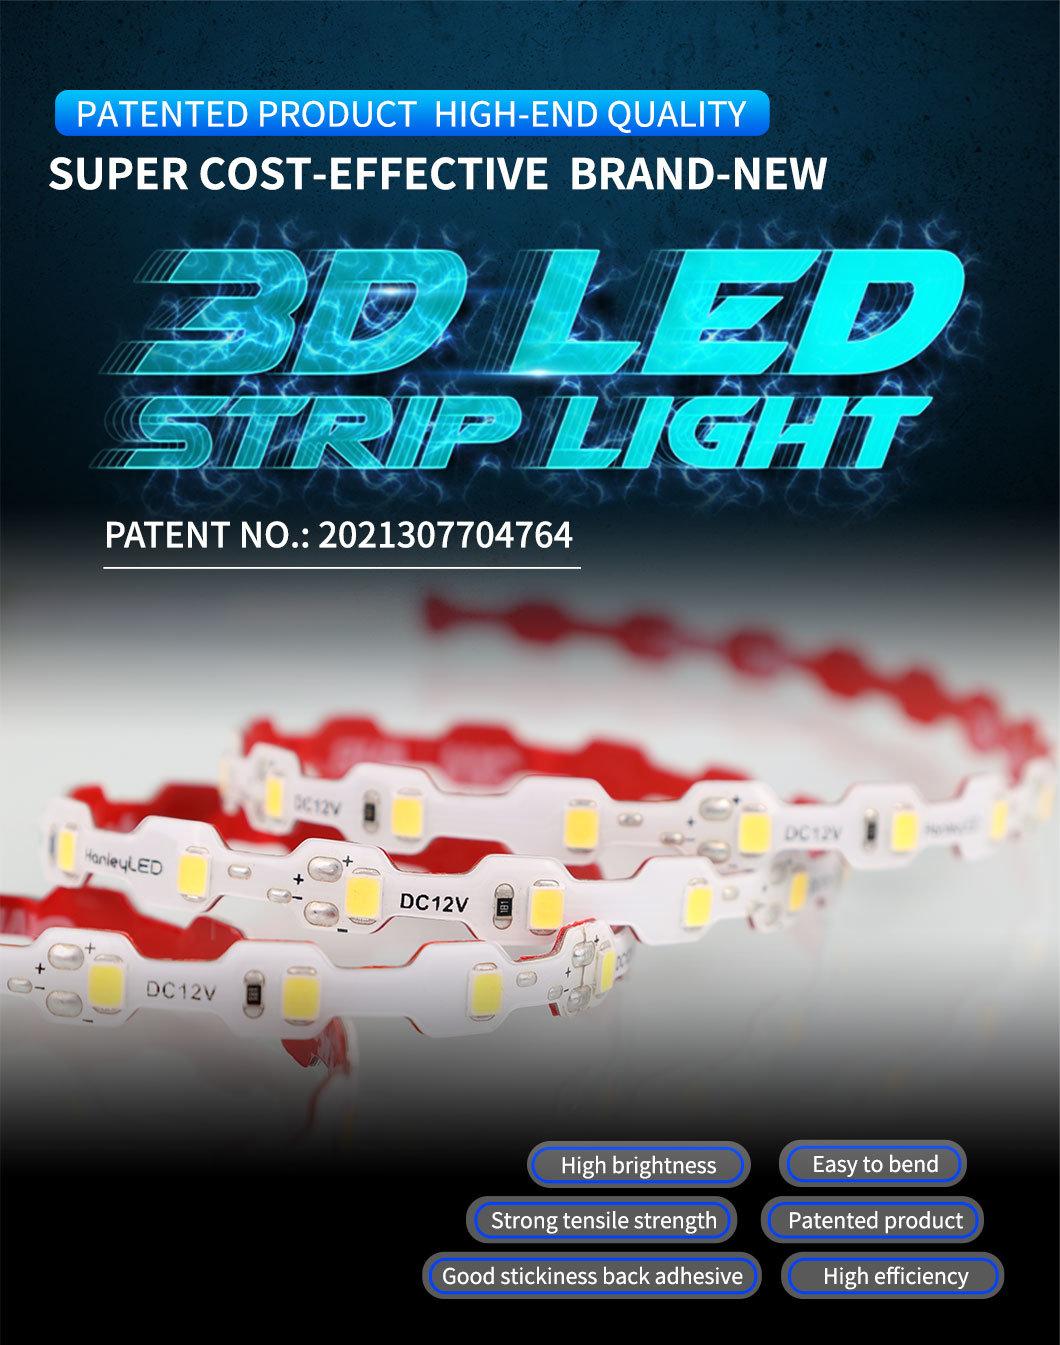 High Brightness Three LEDs Per Cutting Mark More Stable Quality 3D Flexible LED Strips